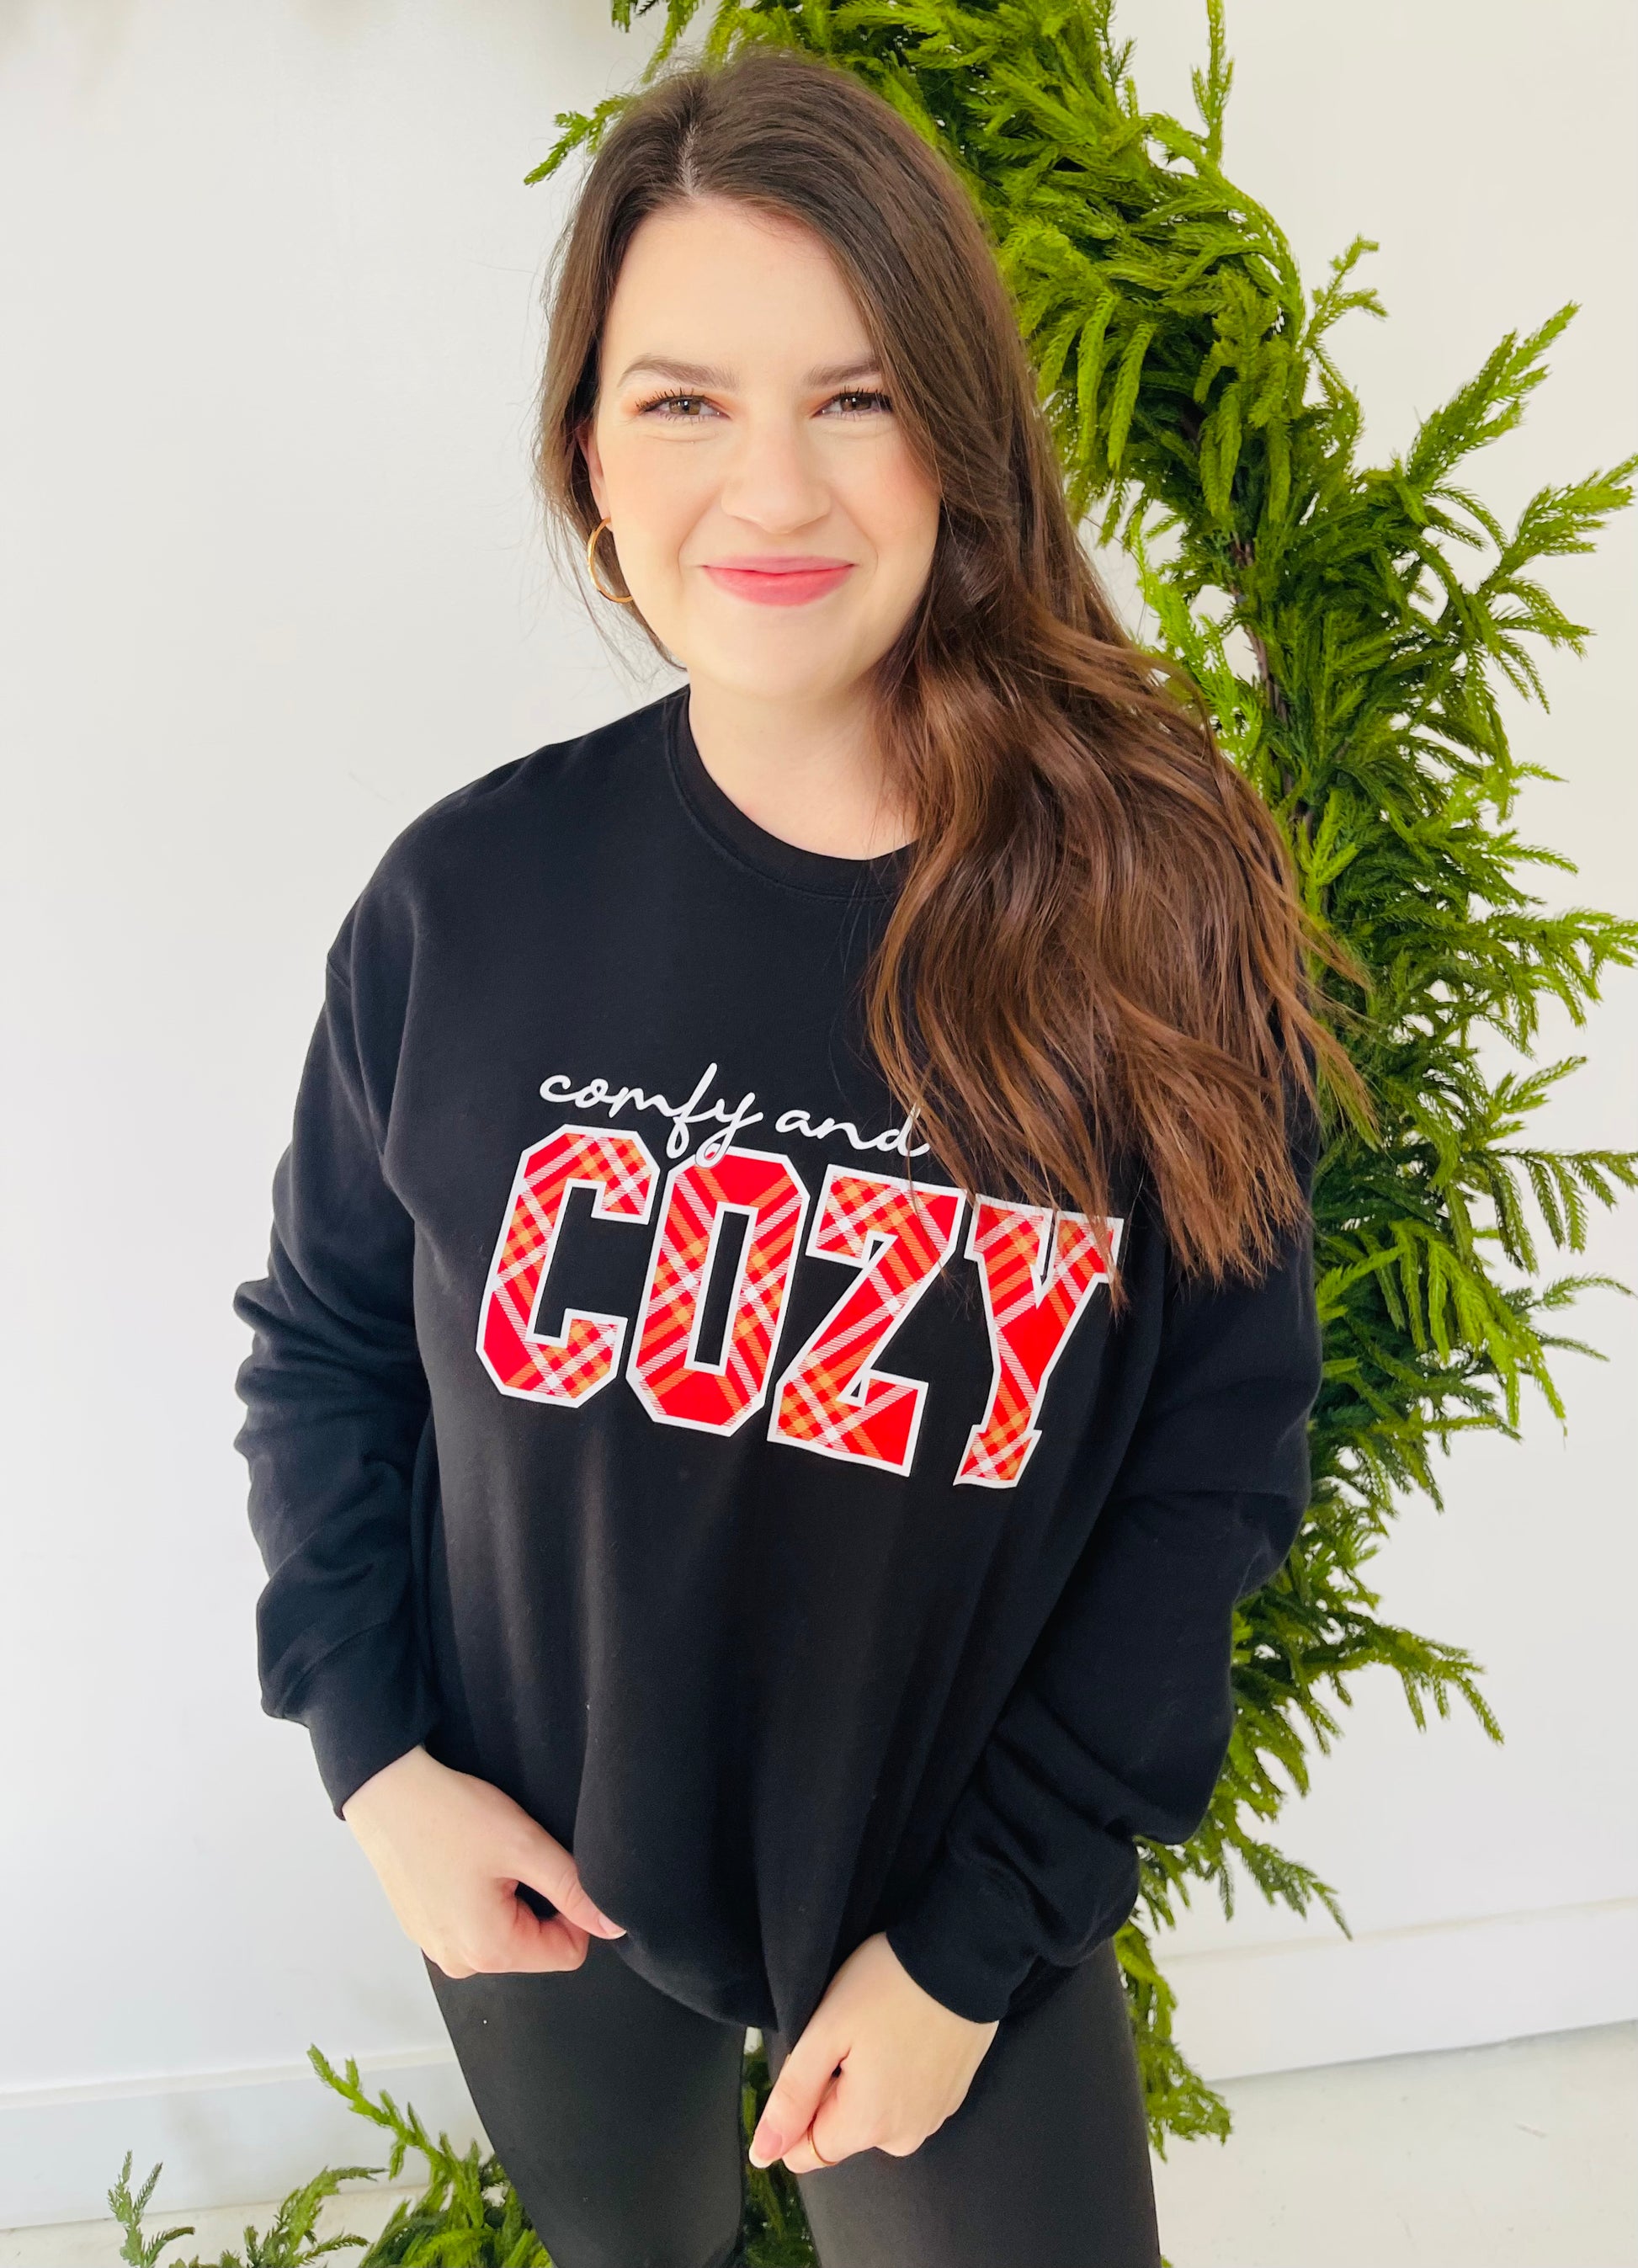 Cozy, comfy, need! This sweatshirt is a black crew neckline with a white, plaid, and gold graphic. This is great to pair with leggings for a Holiday party or to throw on at night during the Holidays!